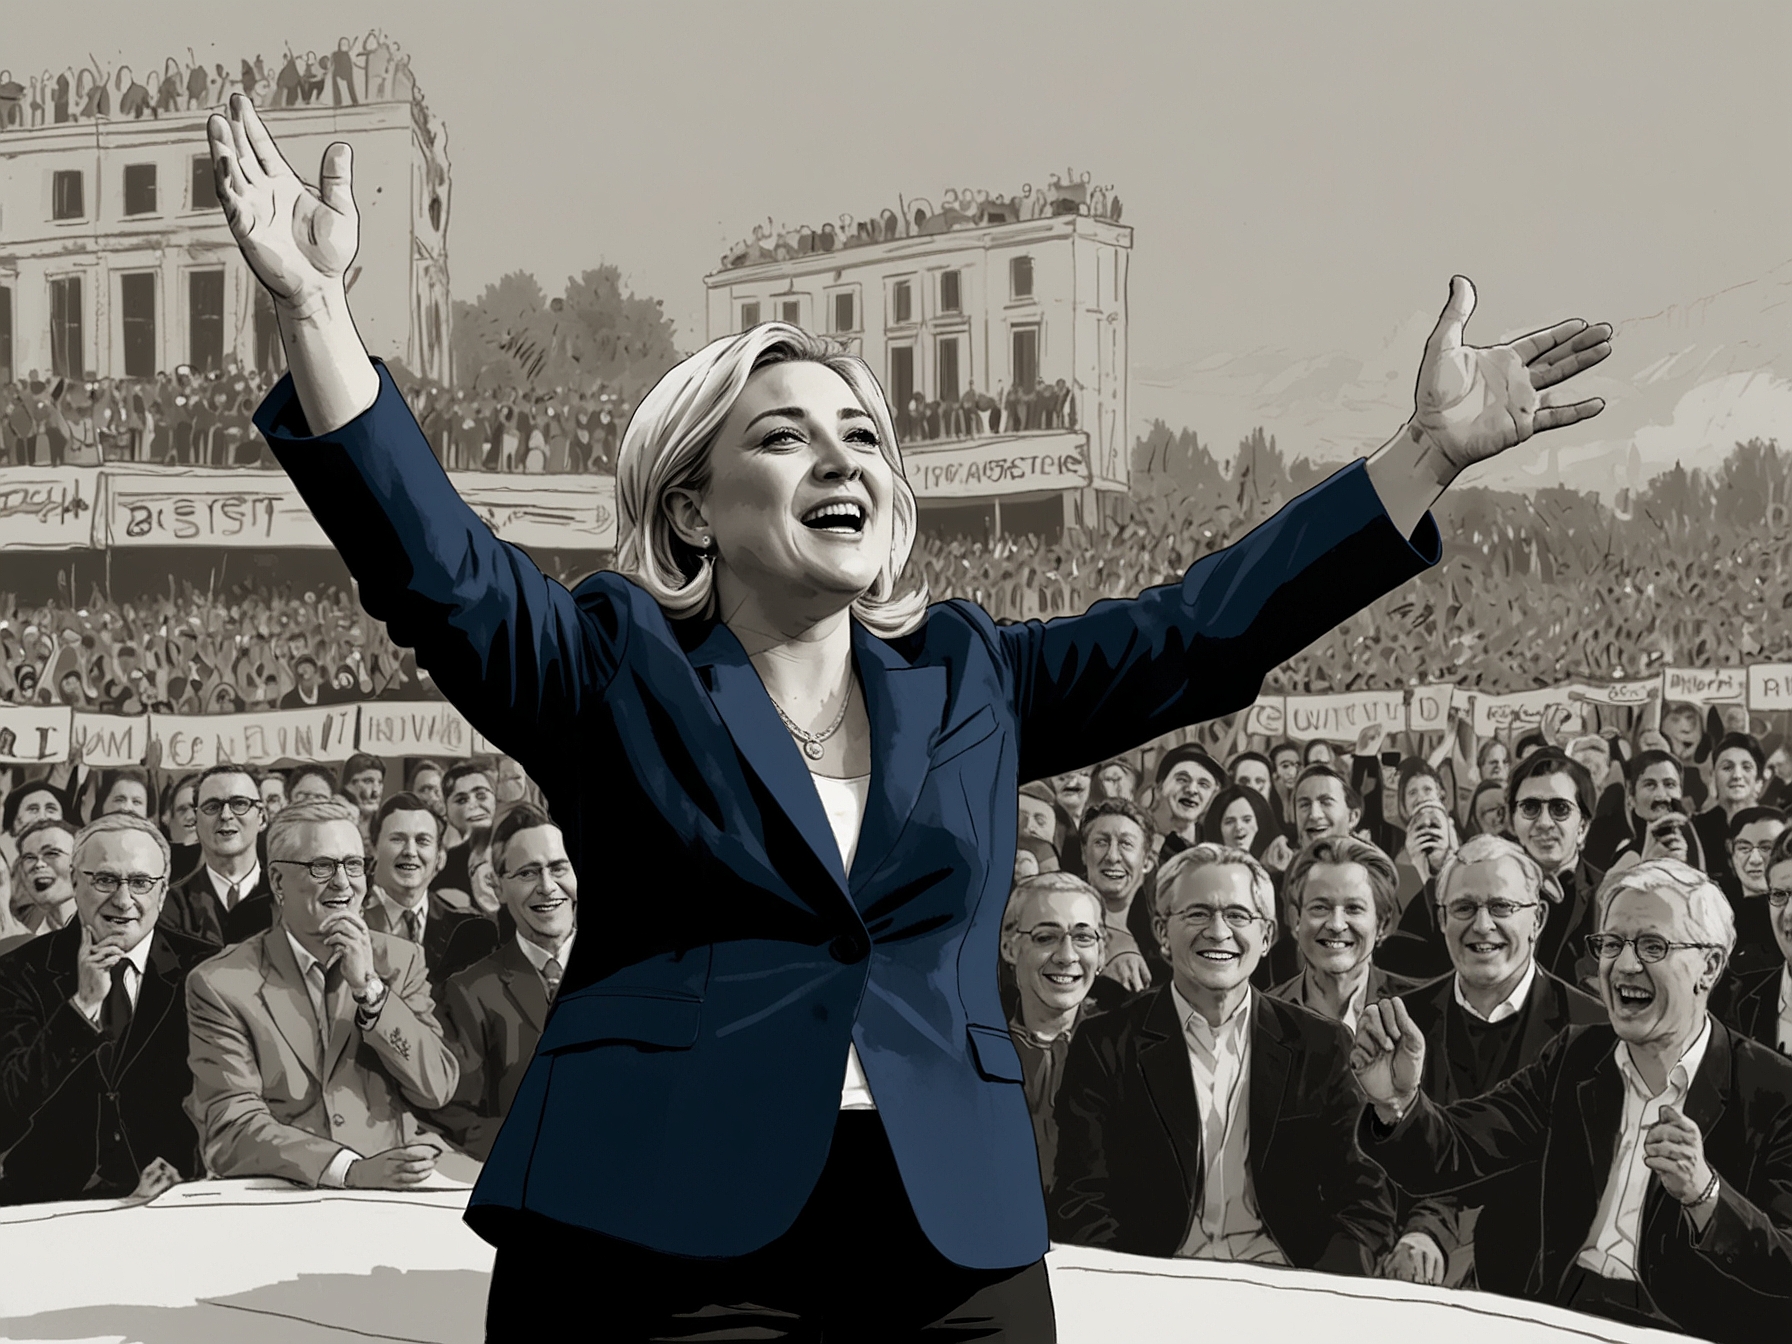 Marine Le Pen addressing her supporters during a rally, capturing the exuberant energy and growing support for the far-right in France's shifting political landscape.